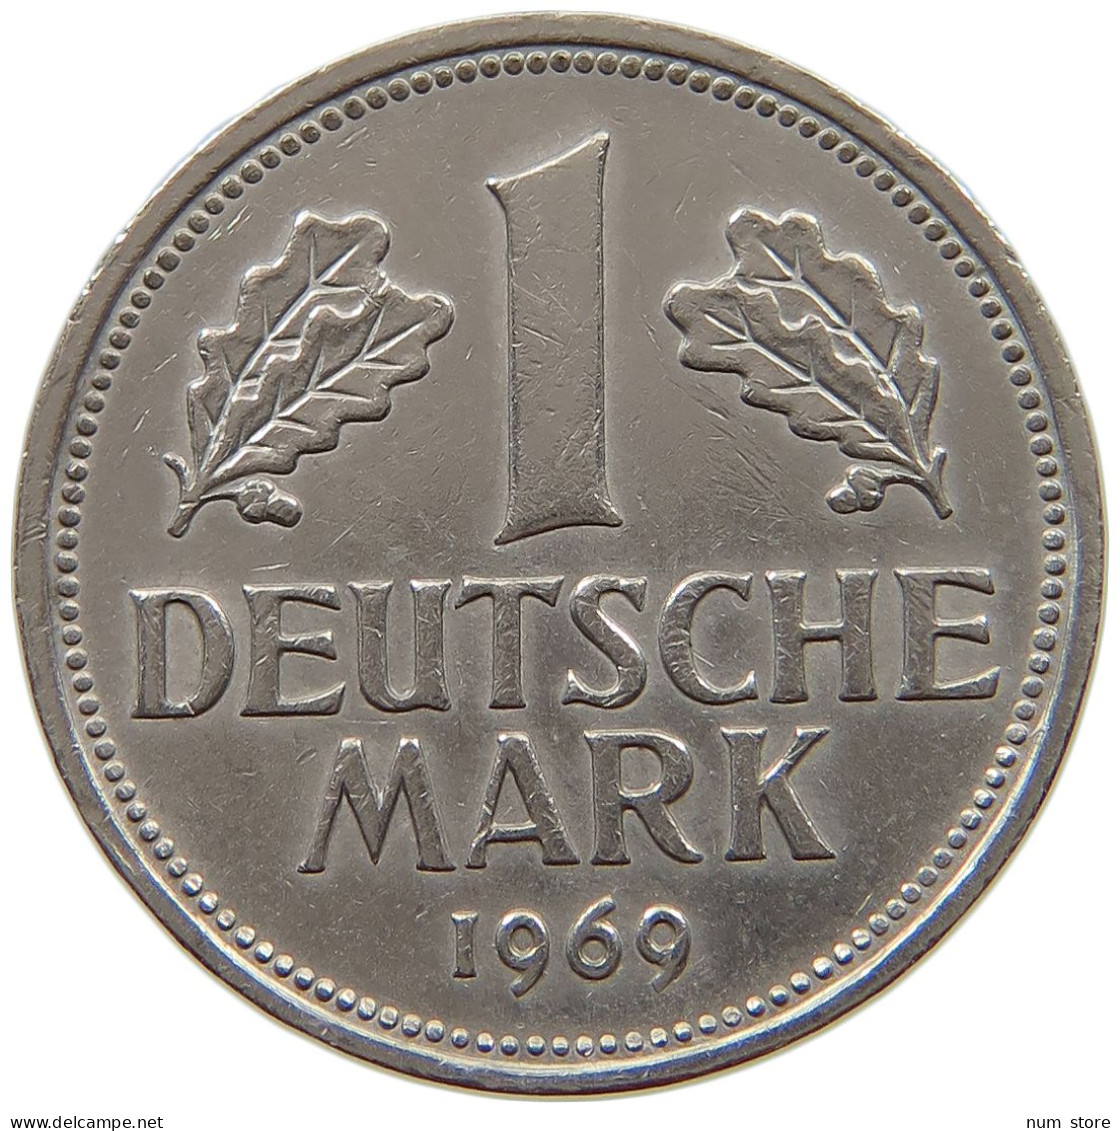 GERMANY WEST 1 MARK 1969 D #a069 0631 - 1 Mark